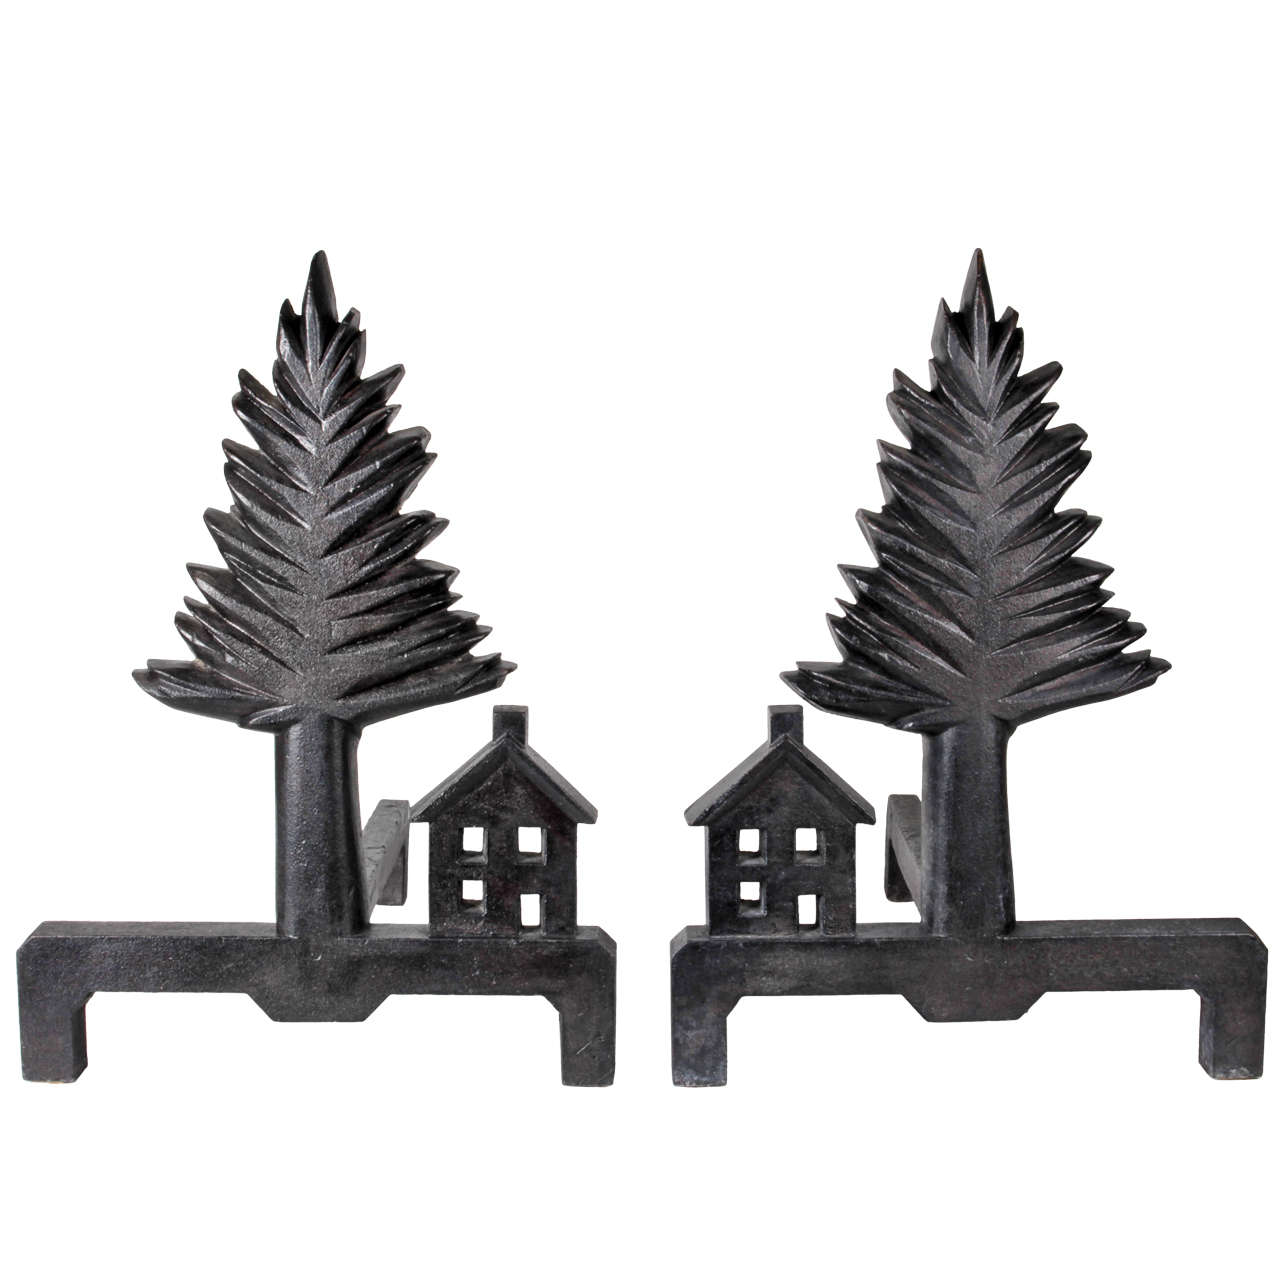 American Folk Art Pine Tree and Shaker Style House Andirons, circa 1920s For Sale